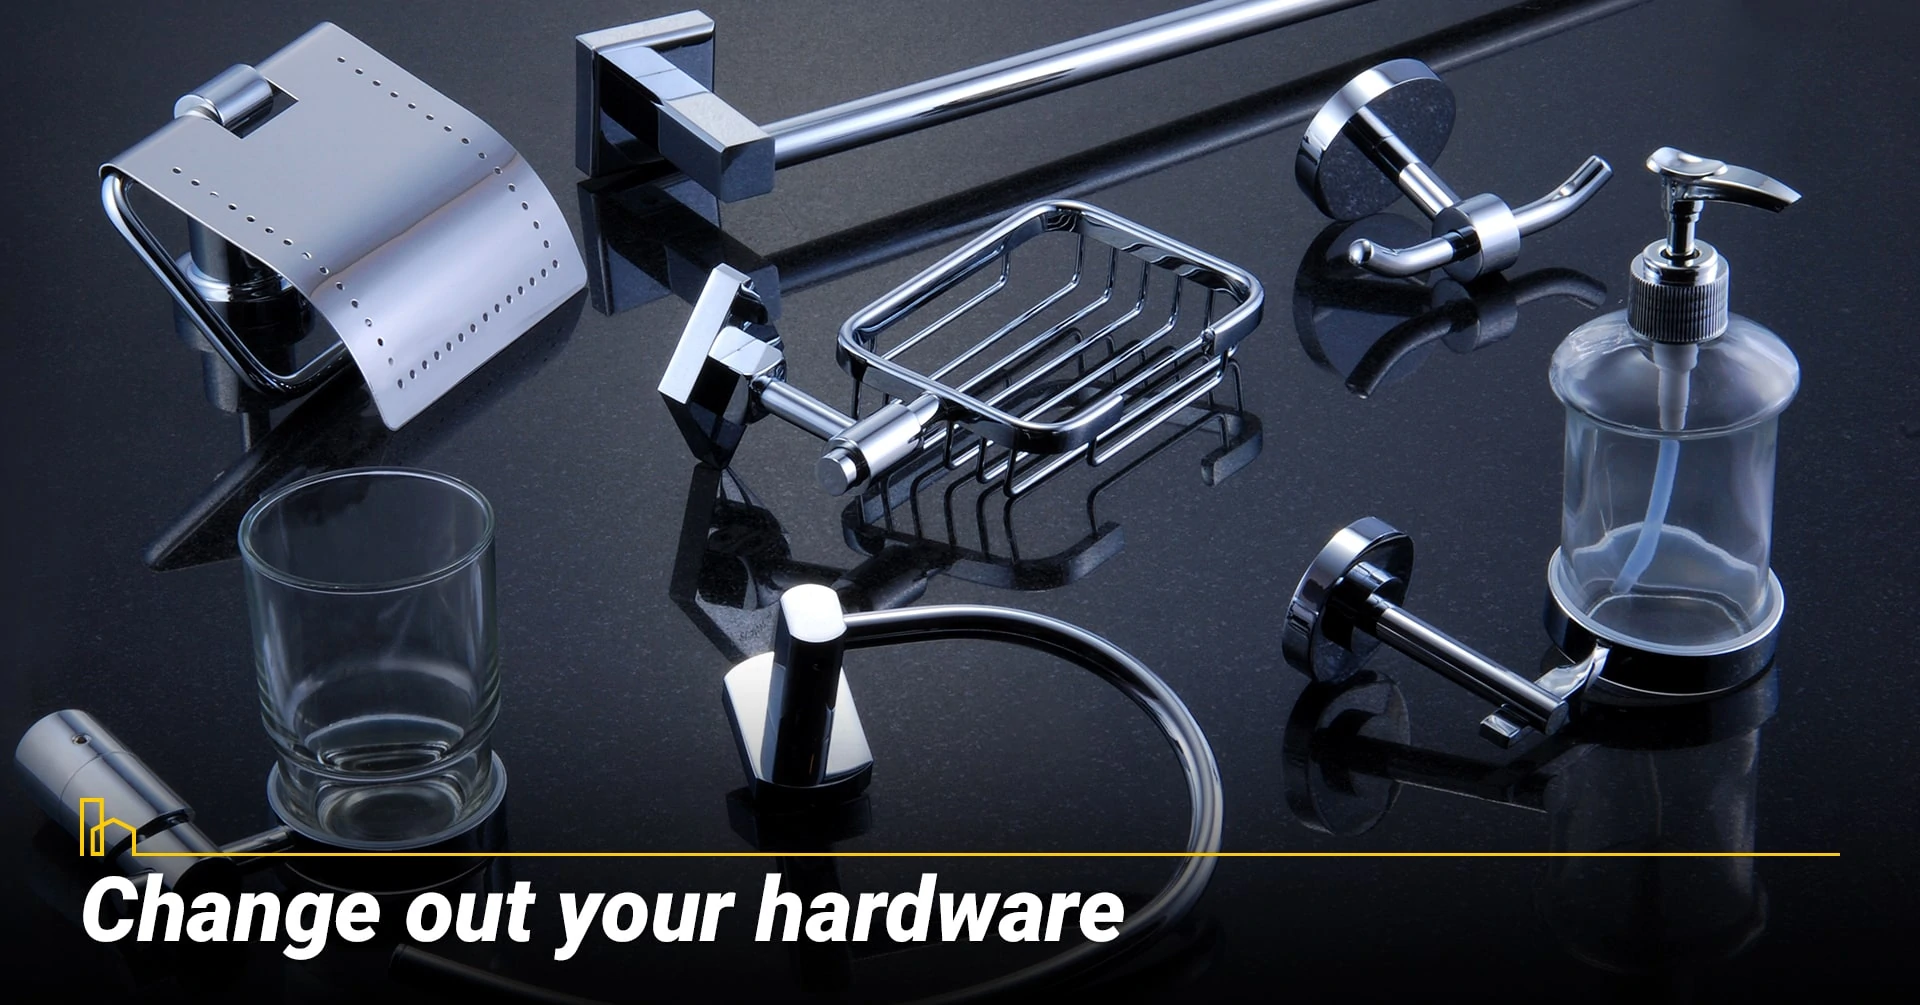 Change out your hardware